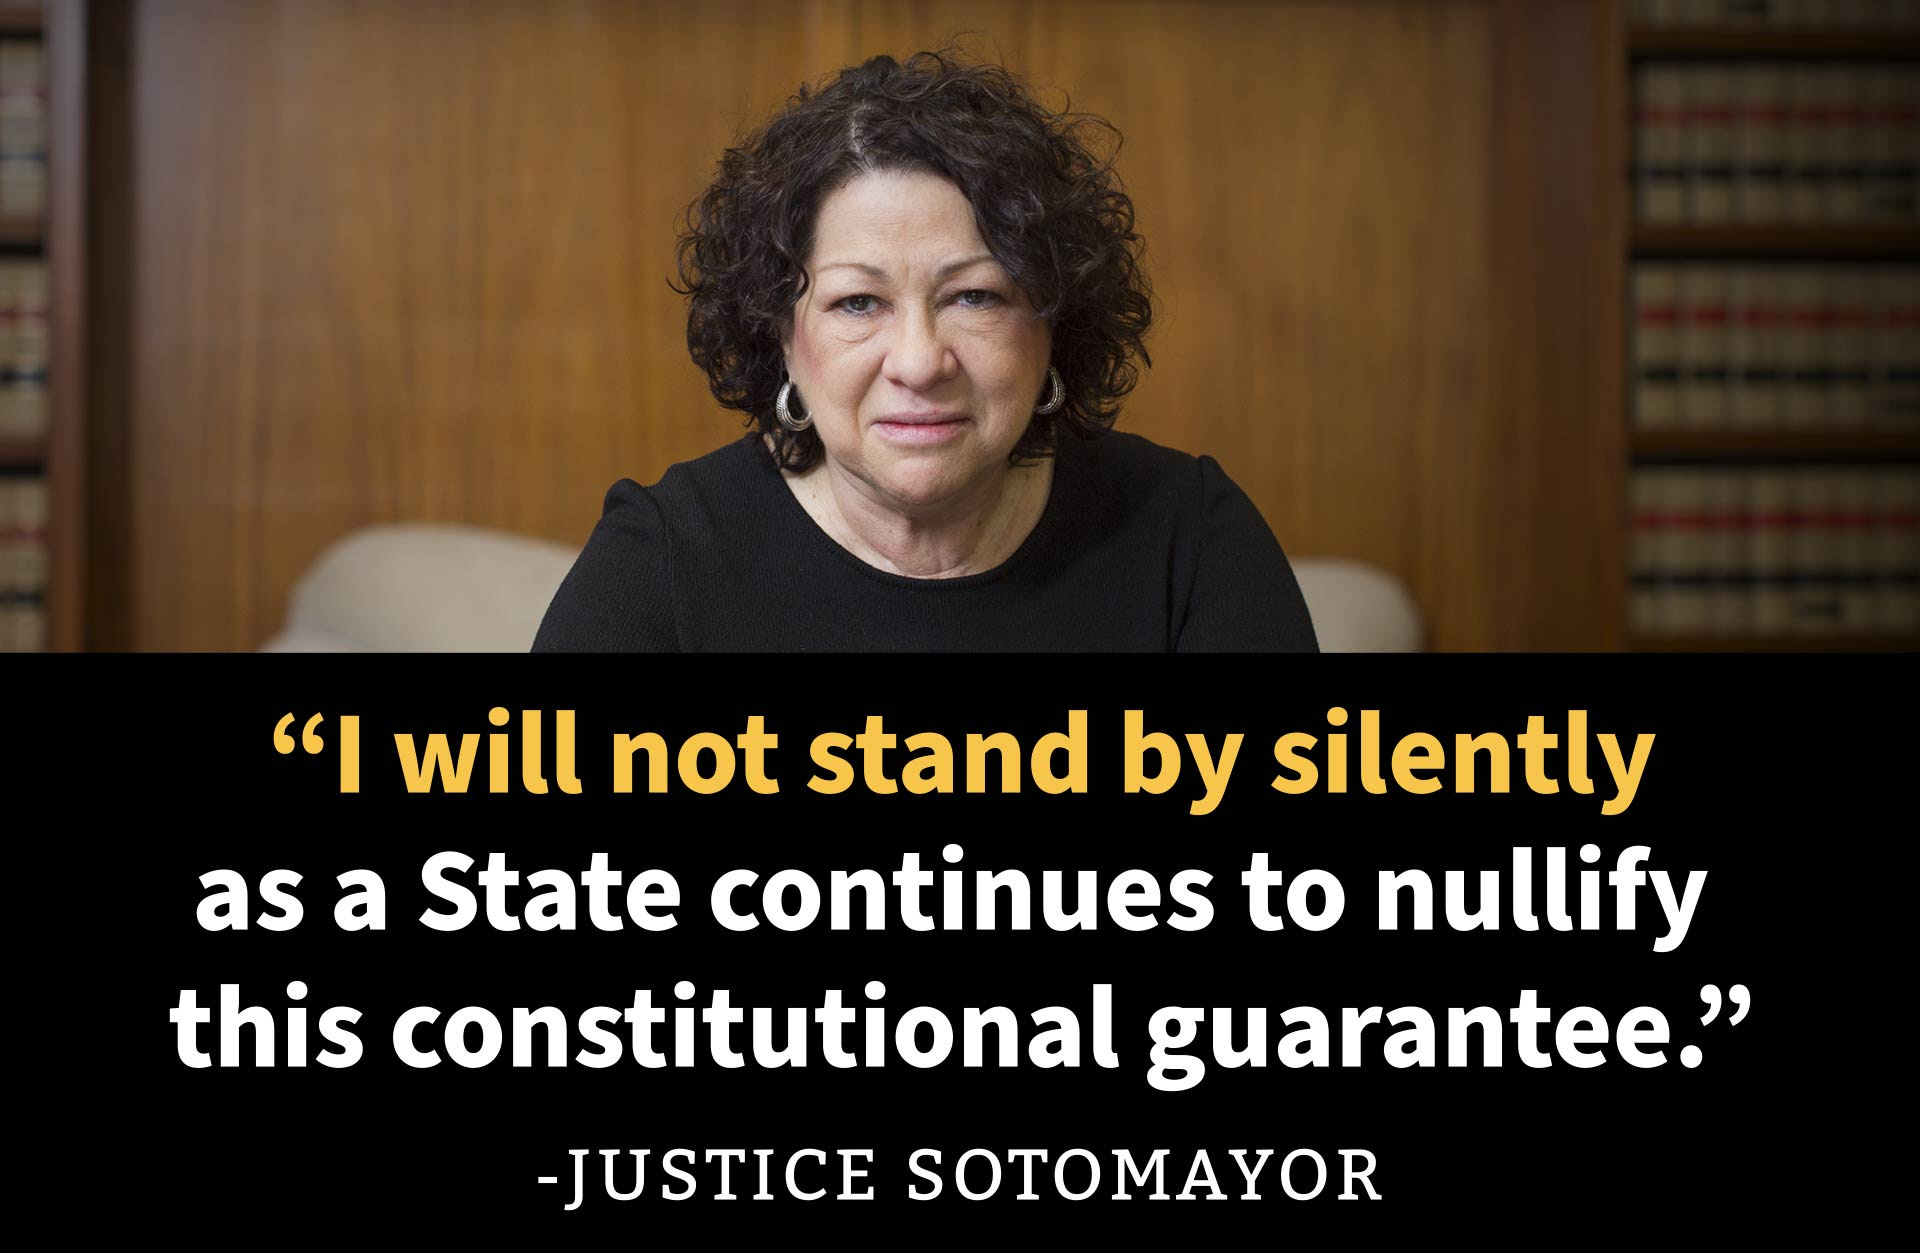 'I will not stand by silently as a State continues to nullify this constitutional guarantee.' - Justice Sotomayor